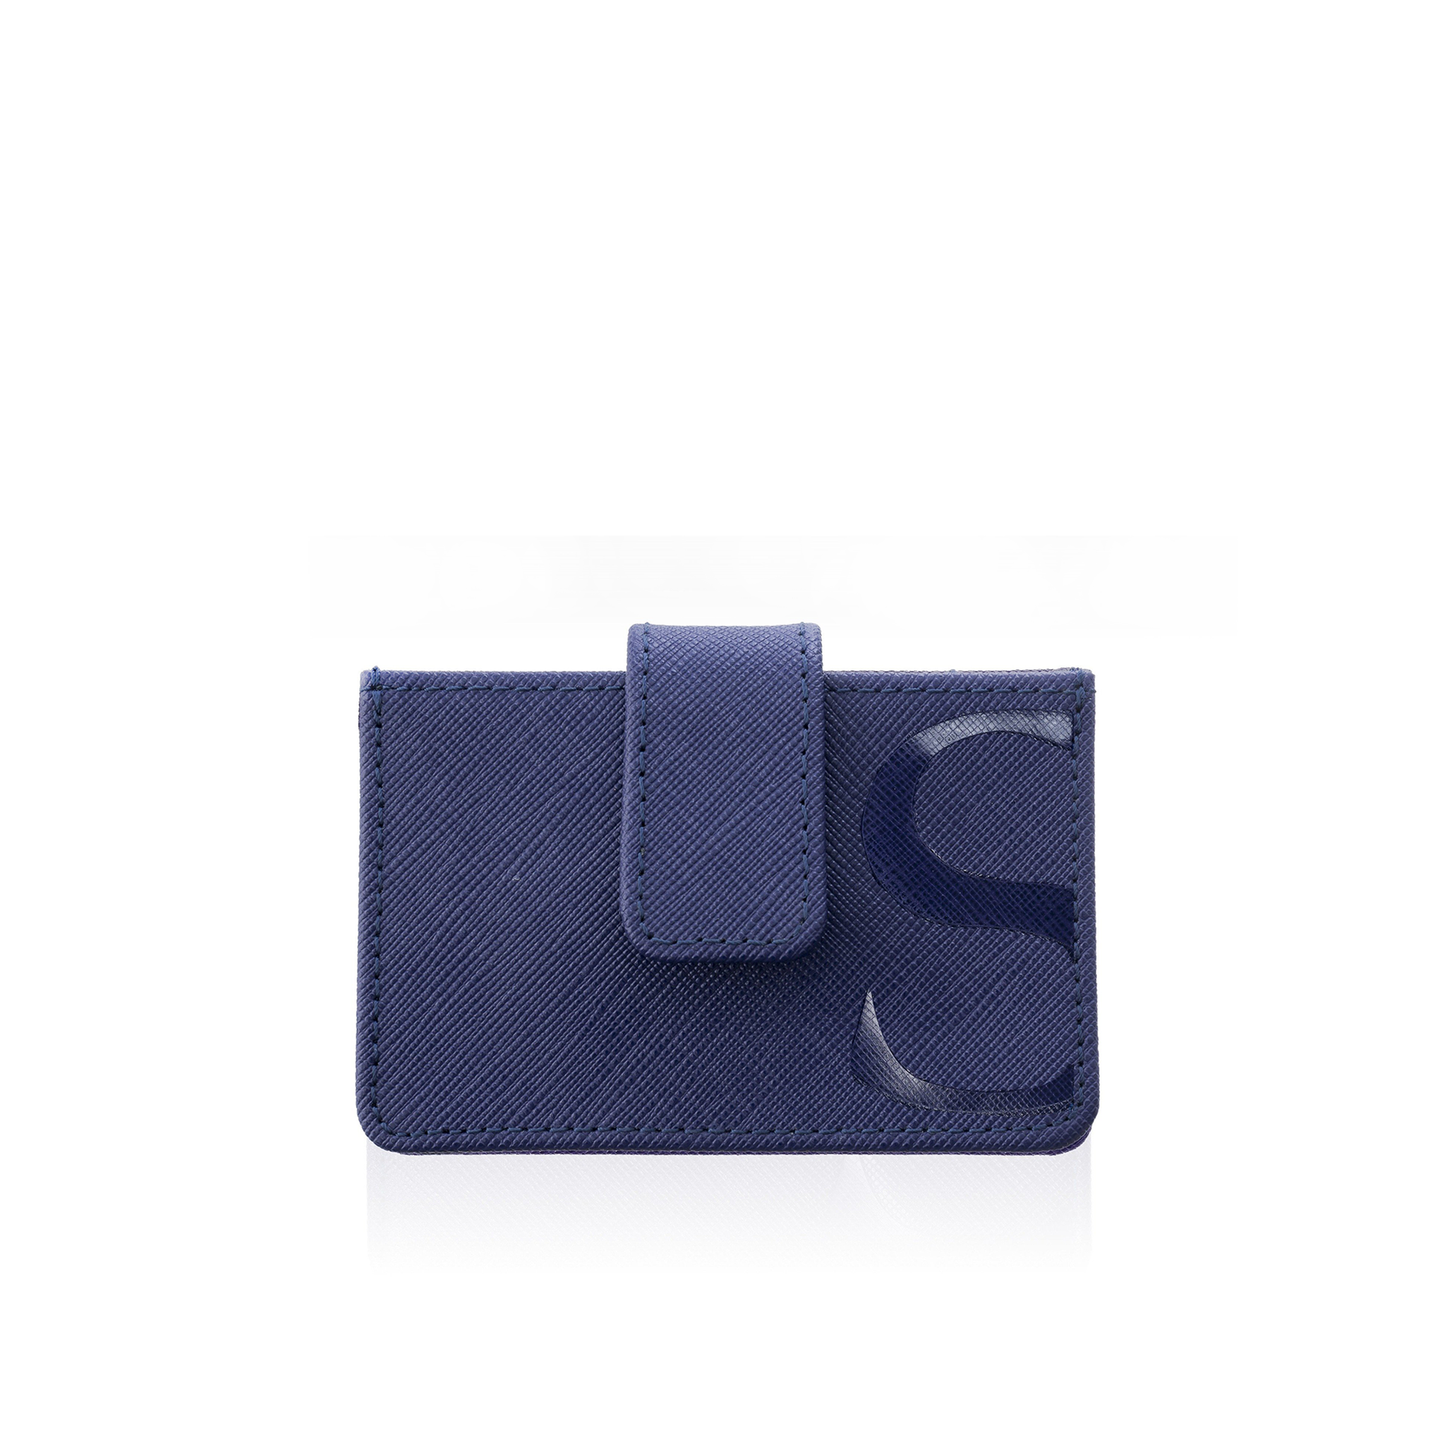 Credit Card Accordion Wallet in Blue Textured Leather